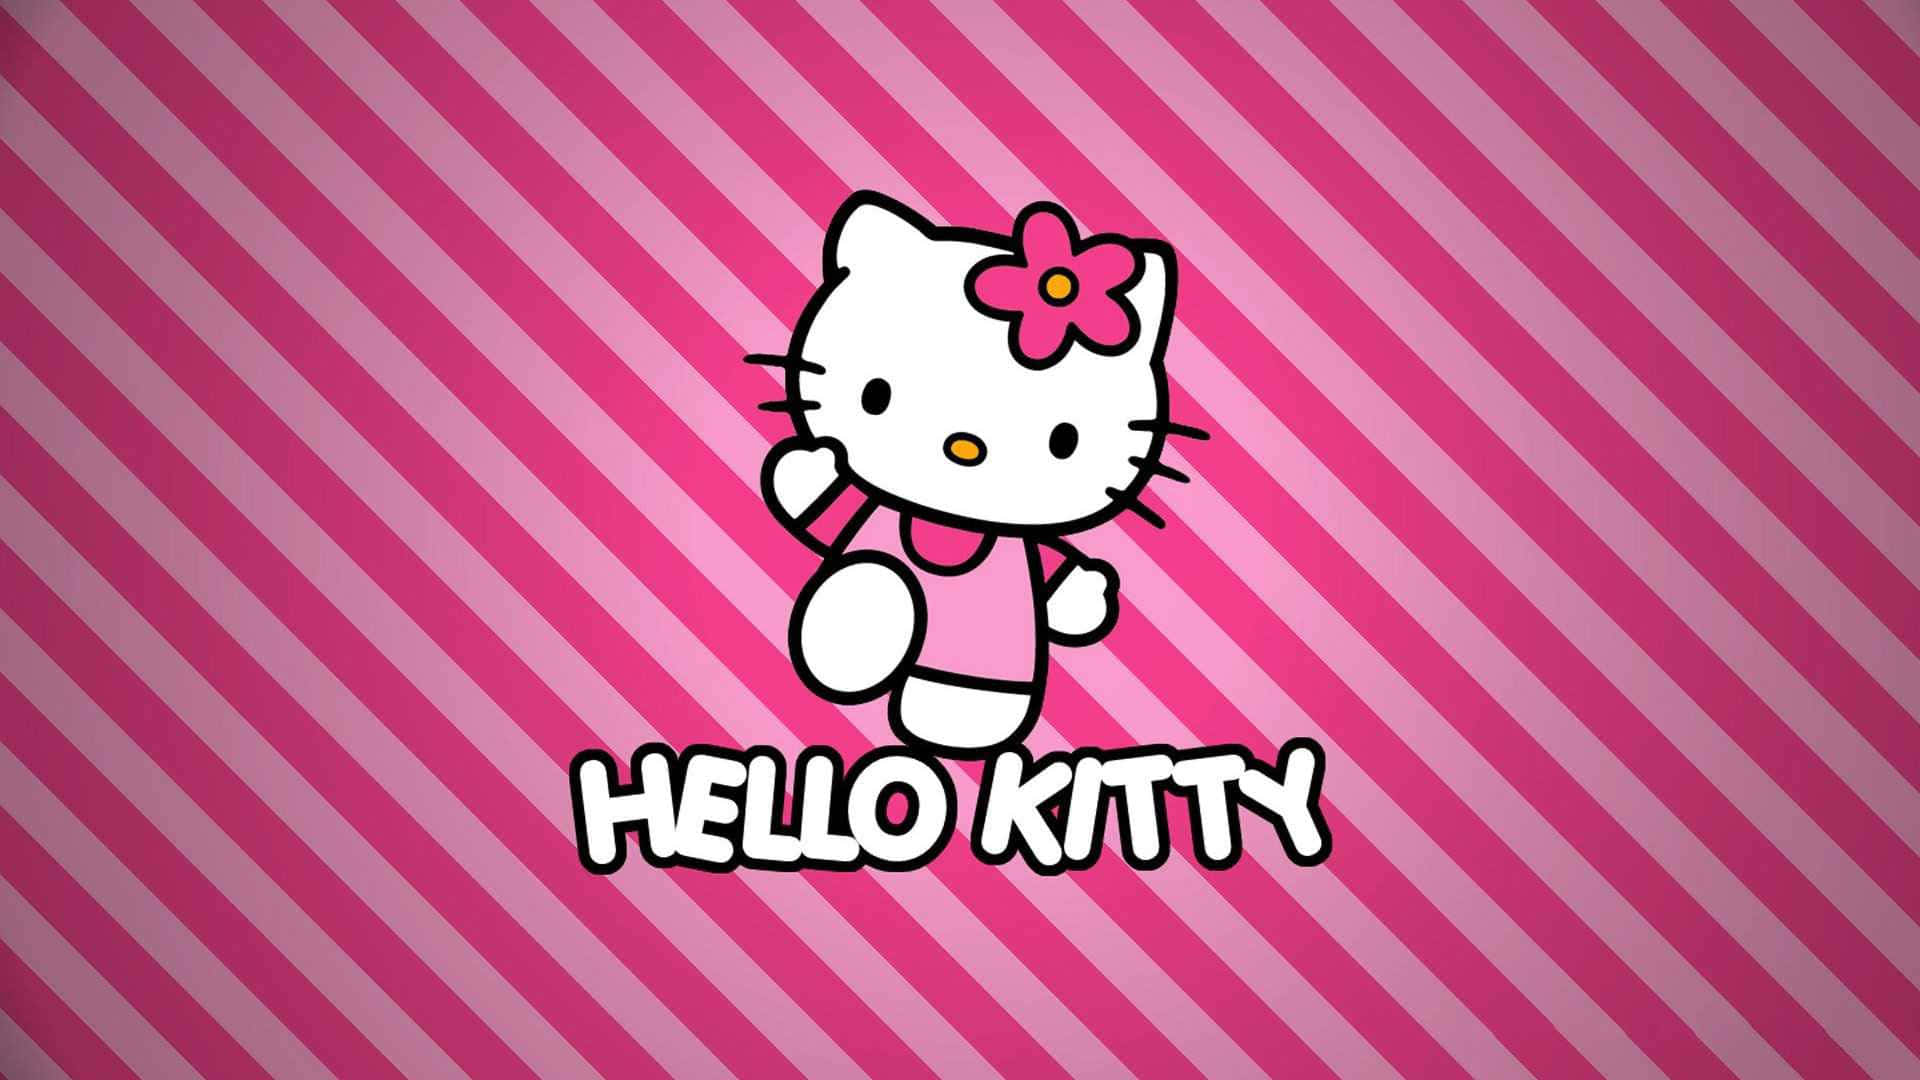 Wallpaper of Colorful Greeting from Sanrio